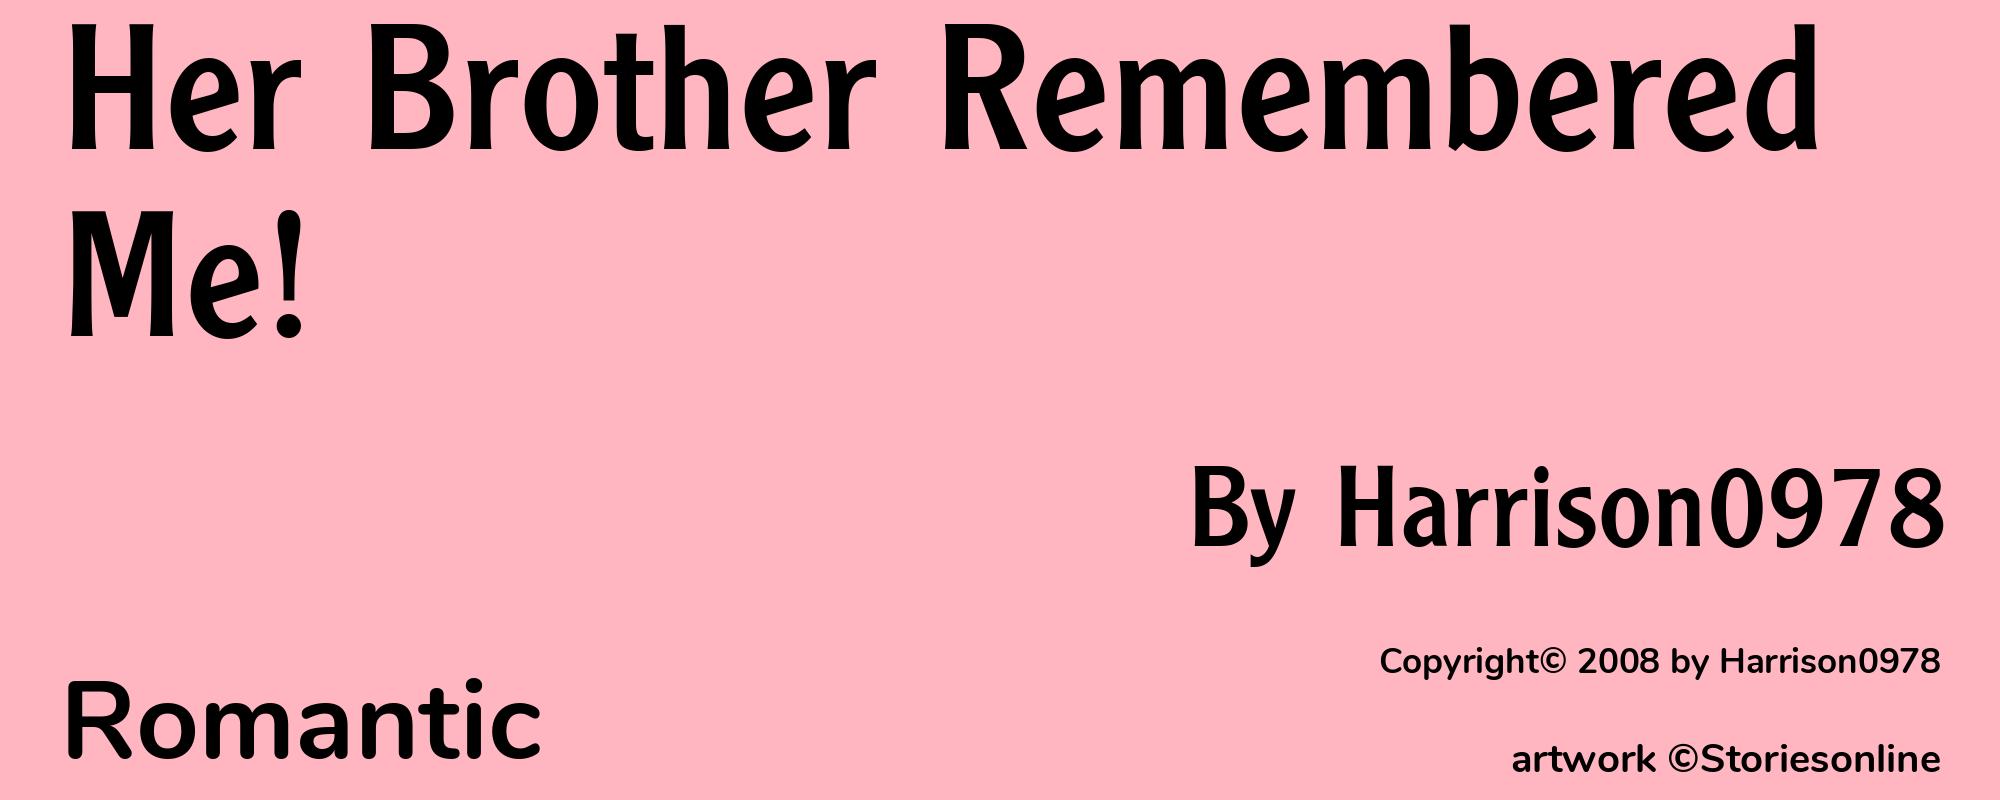 Her Brother Remembered Me! - Cover